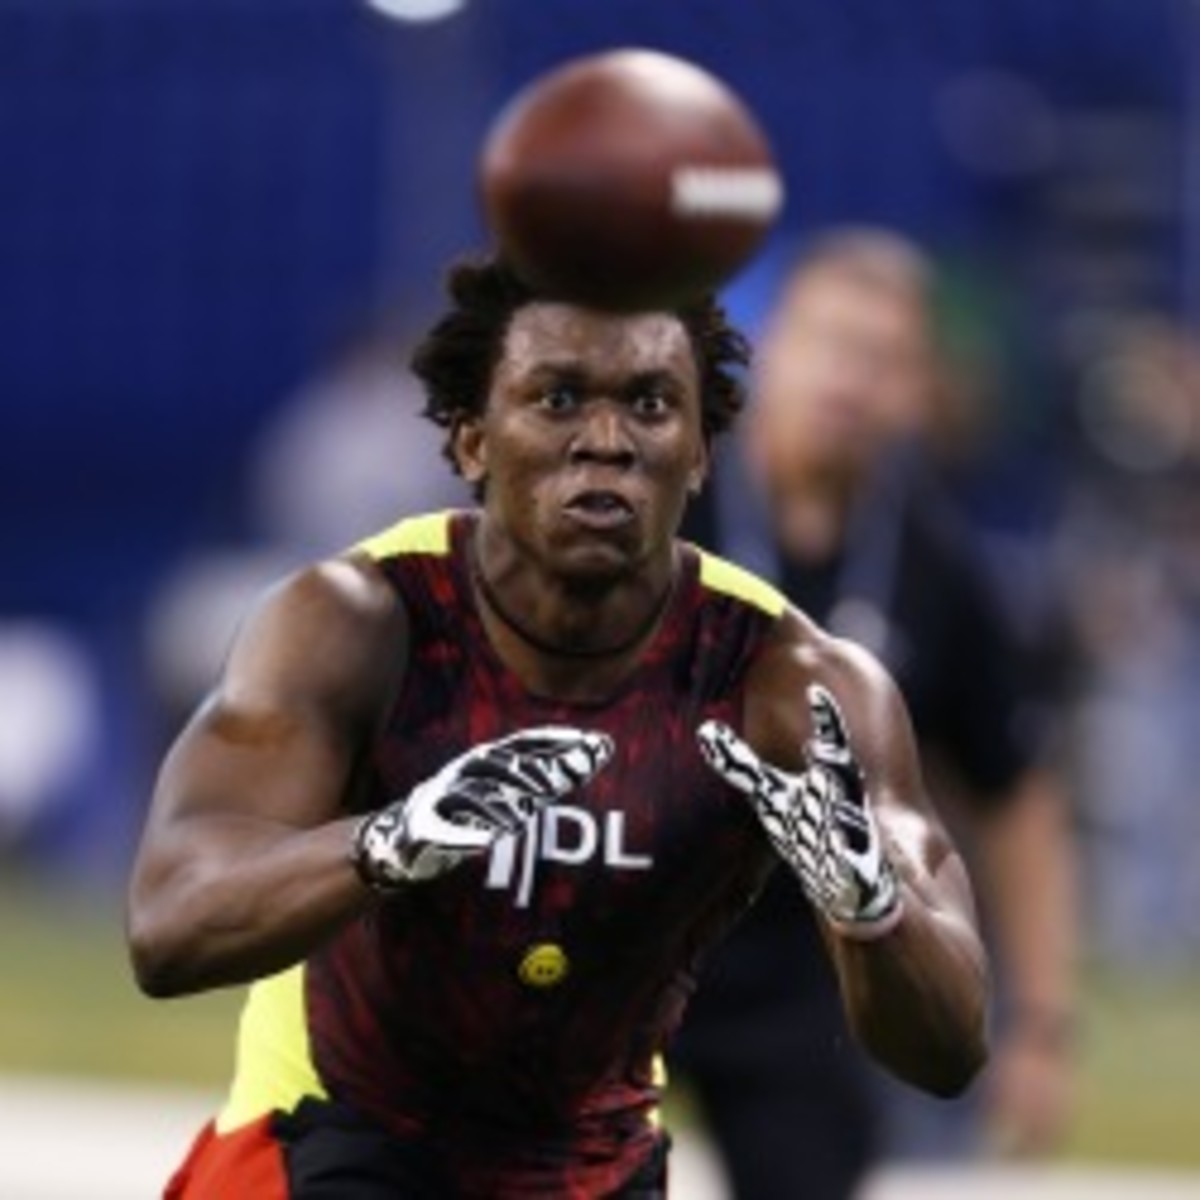 BYU's Ziggy Ansah is expected to be a first-round pick. (Joe Robbins/Getty Images)